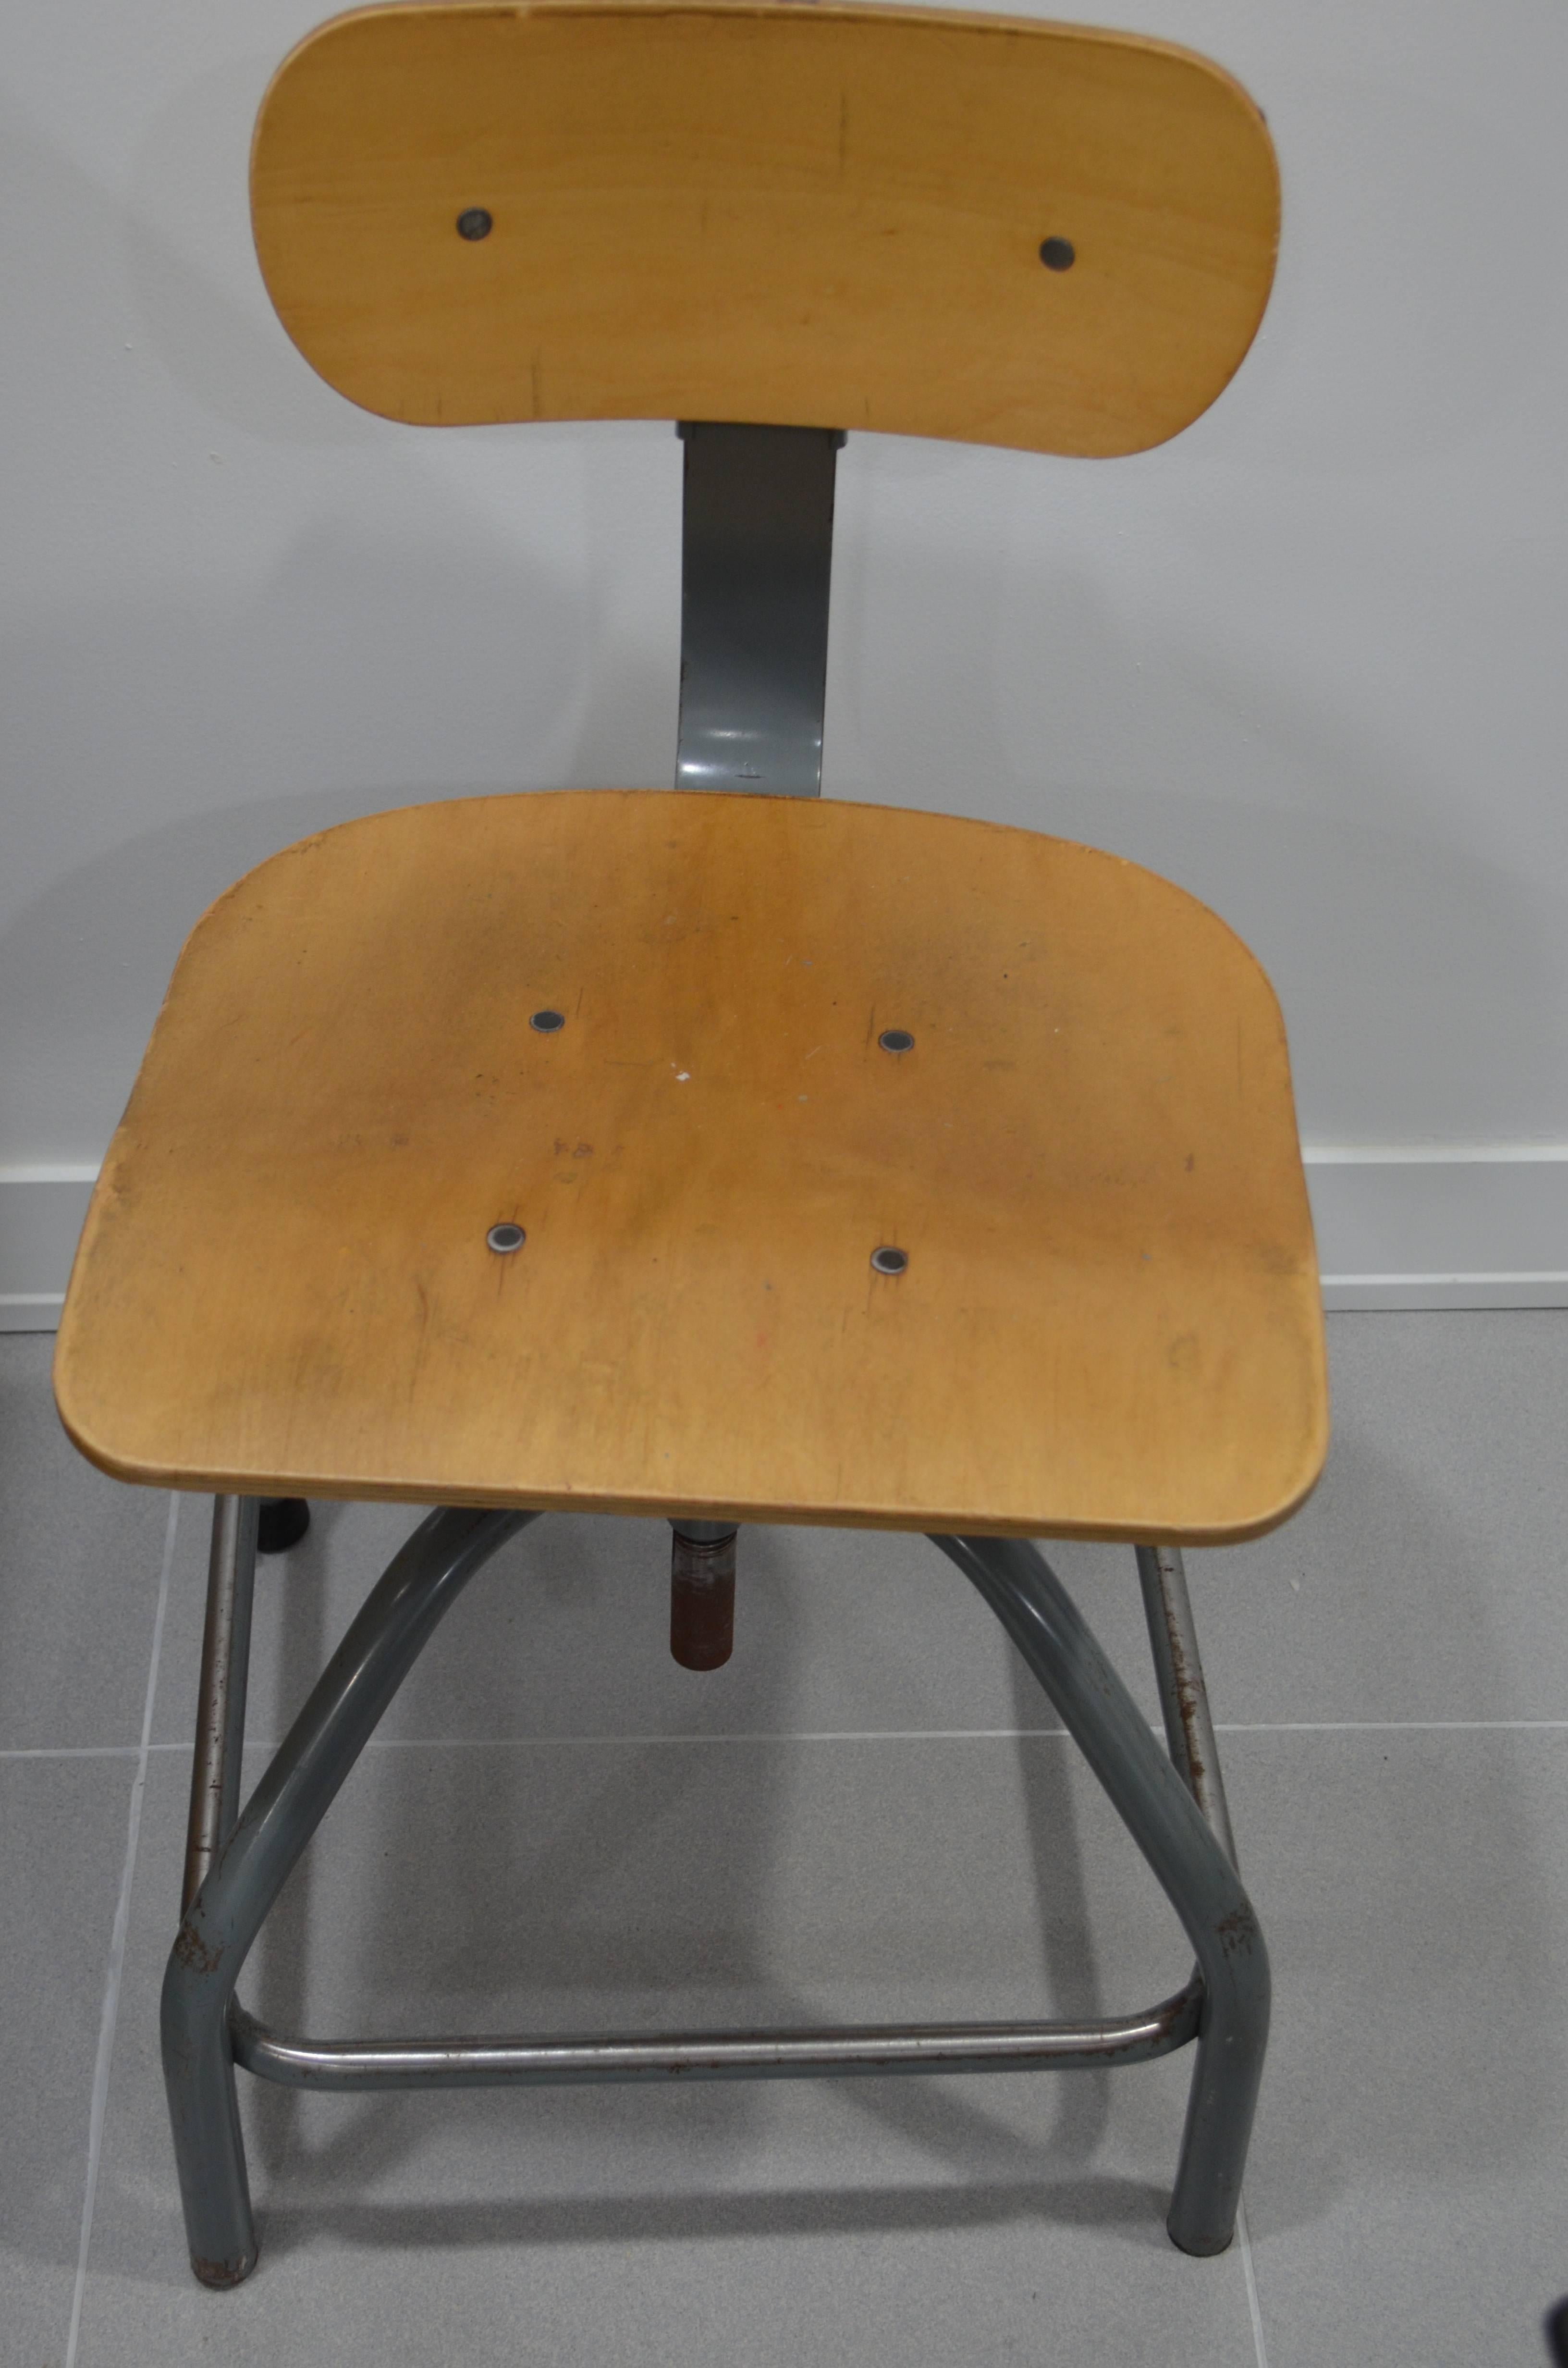 Industrial counter stool from BEVCO. Made of steel with plywood seat. Very easy to get comfortable in this stool that adjusts for height, depth to counter and support to back. And includes a steel footrest all around. 16 available.
Ships free